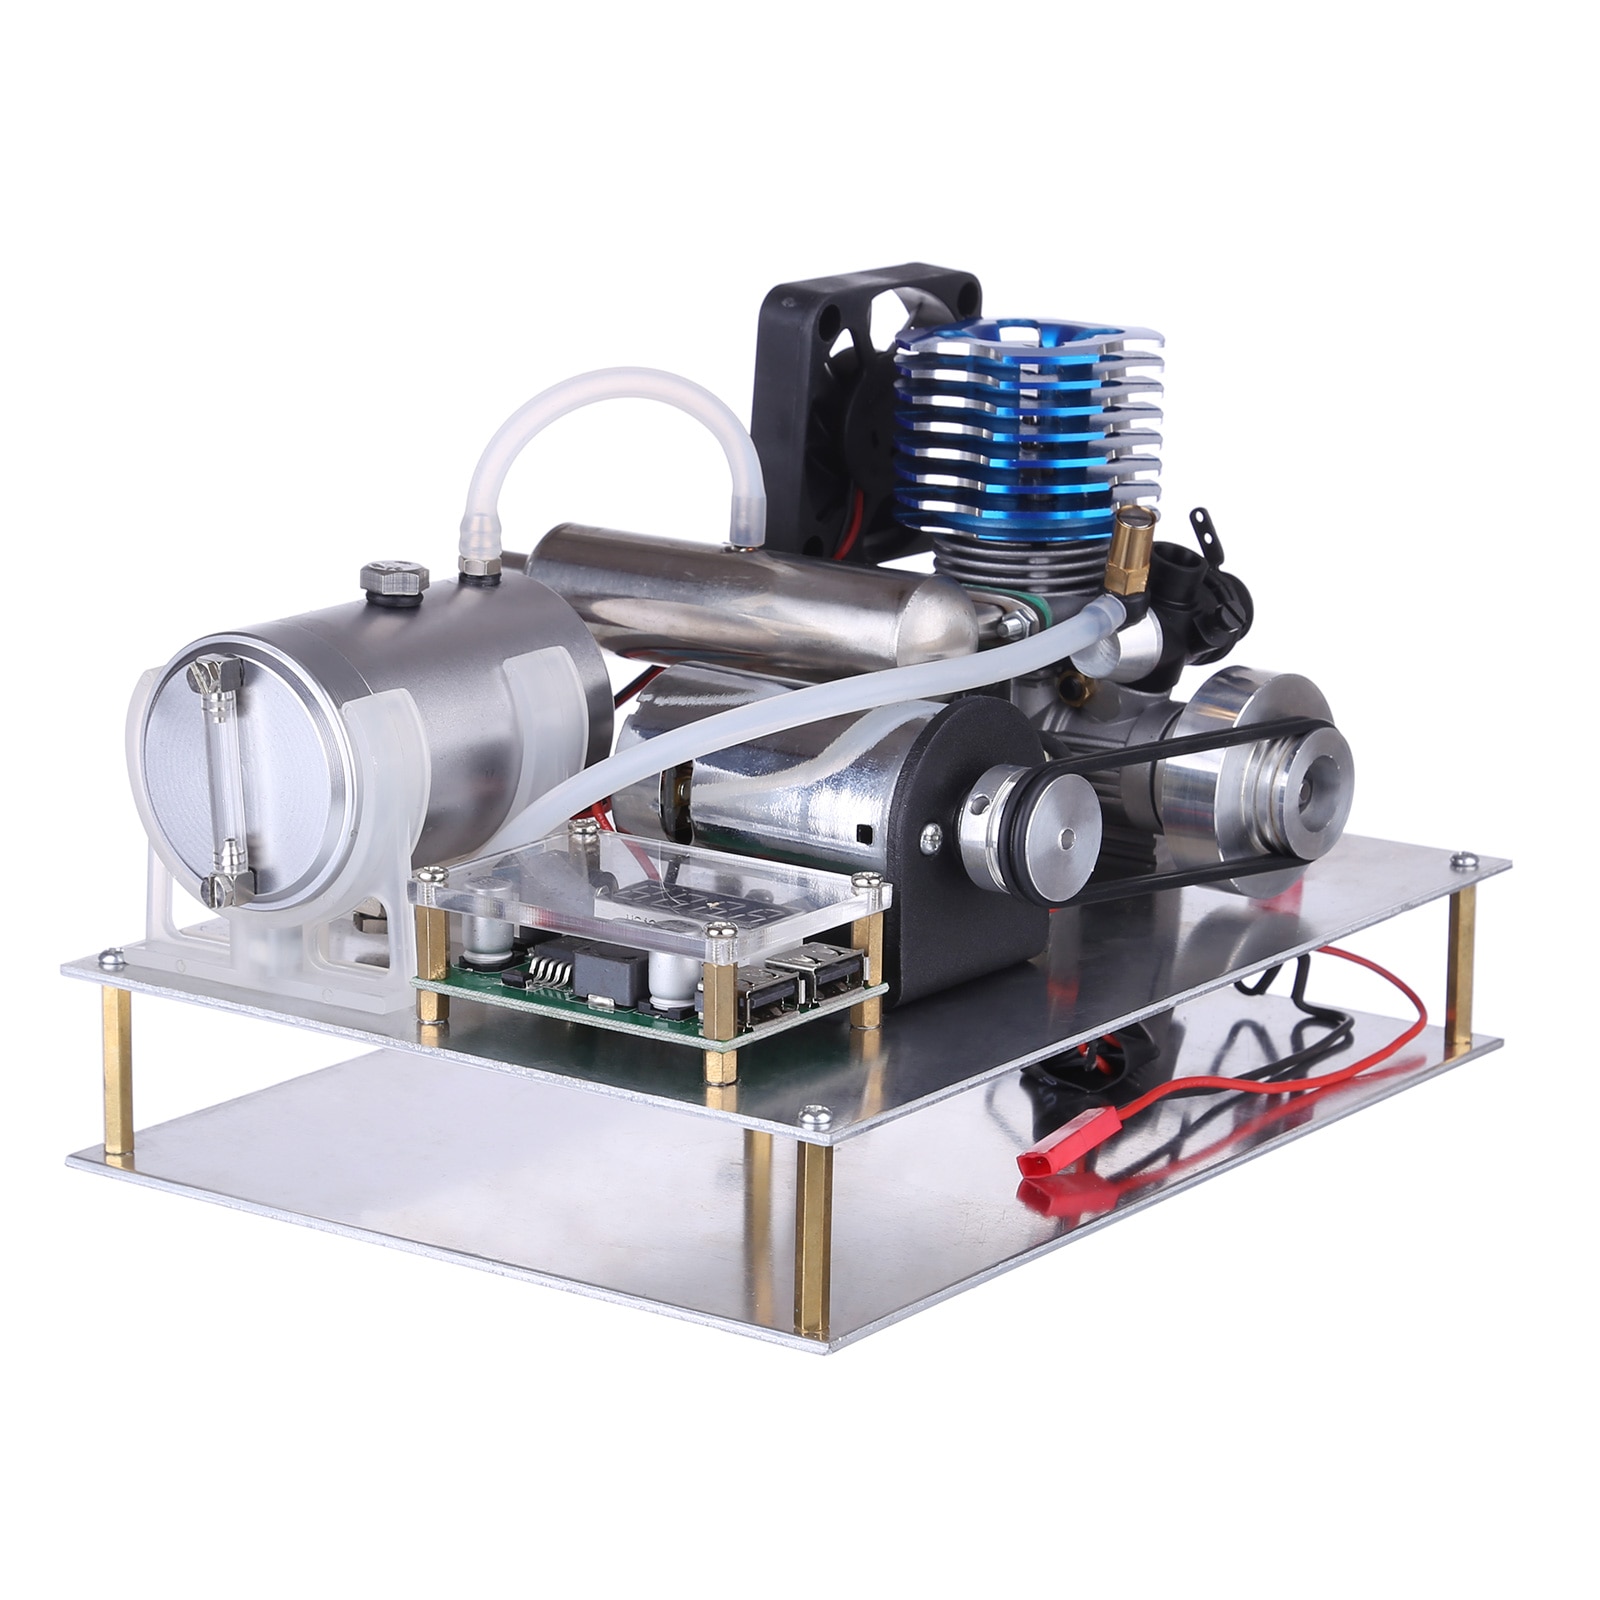 VX 18 Single Cylinder 2-stroke Air-cooled Assembled Methanol Engine Generator Model with Voltage Digital Display and Dual USB 5